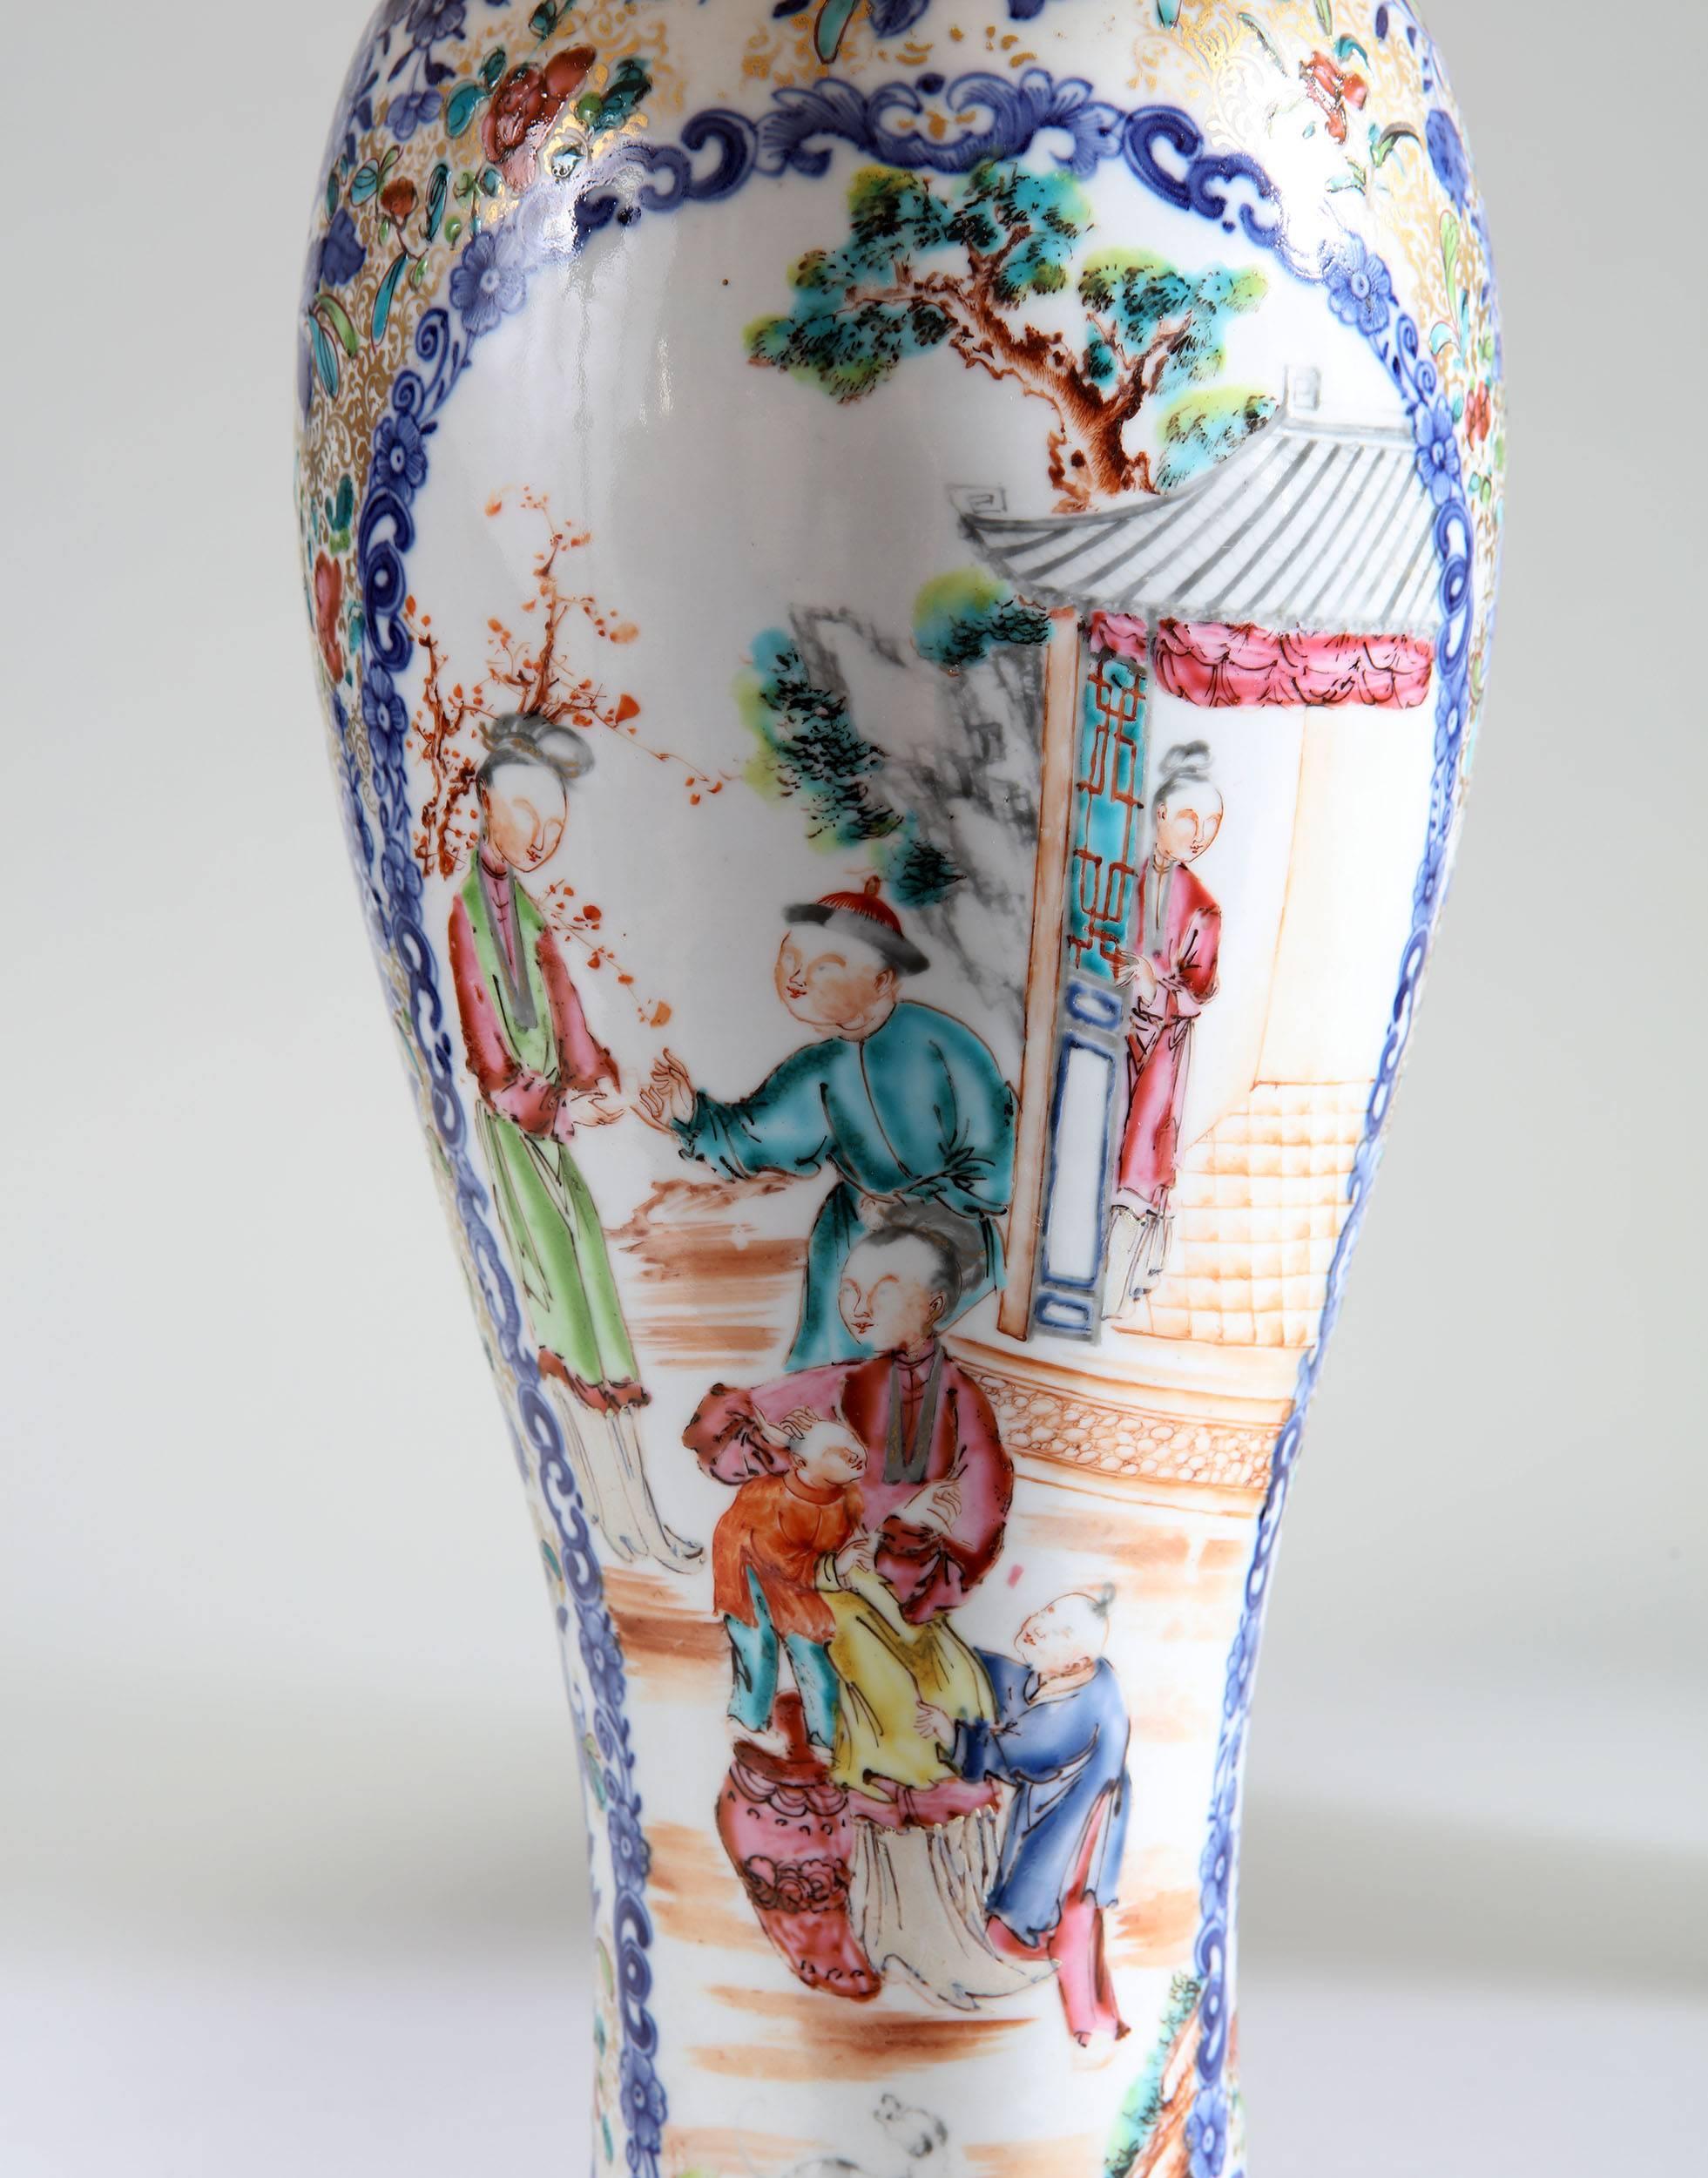 A fine pair of late 18th century Chinese export porcelain vases, now mounted as lamps, with polychrome decoration throughout, showing scenes of Chinese figures surrounded by a floral motif.

Please note: lampshades not included. 

Curently wired for